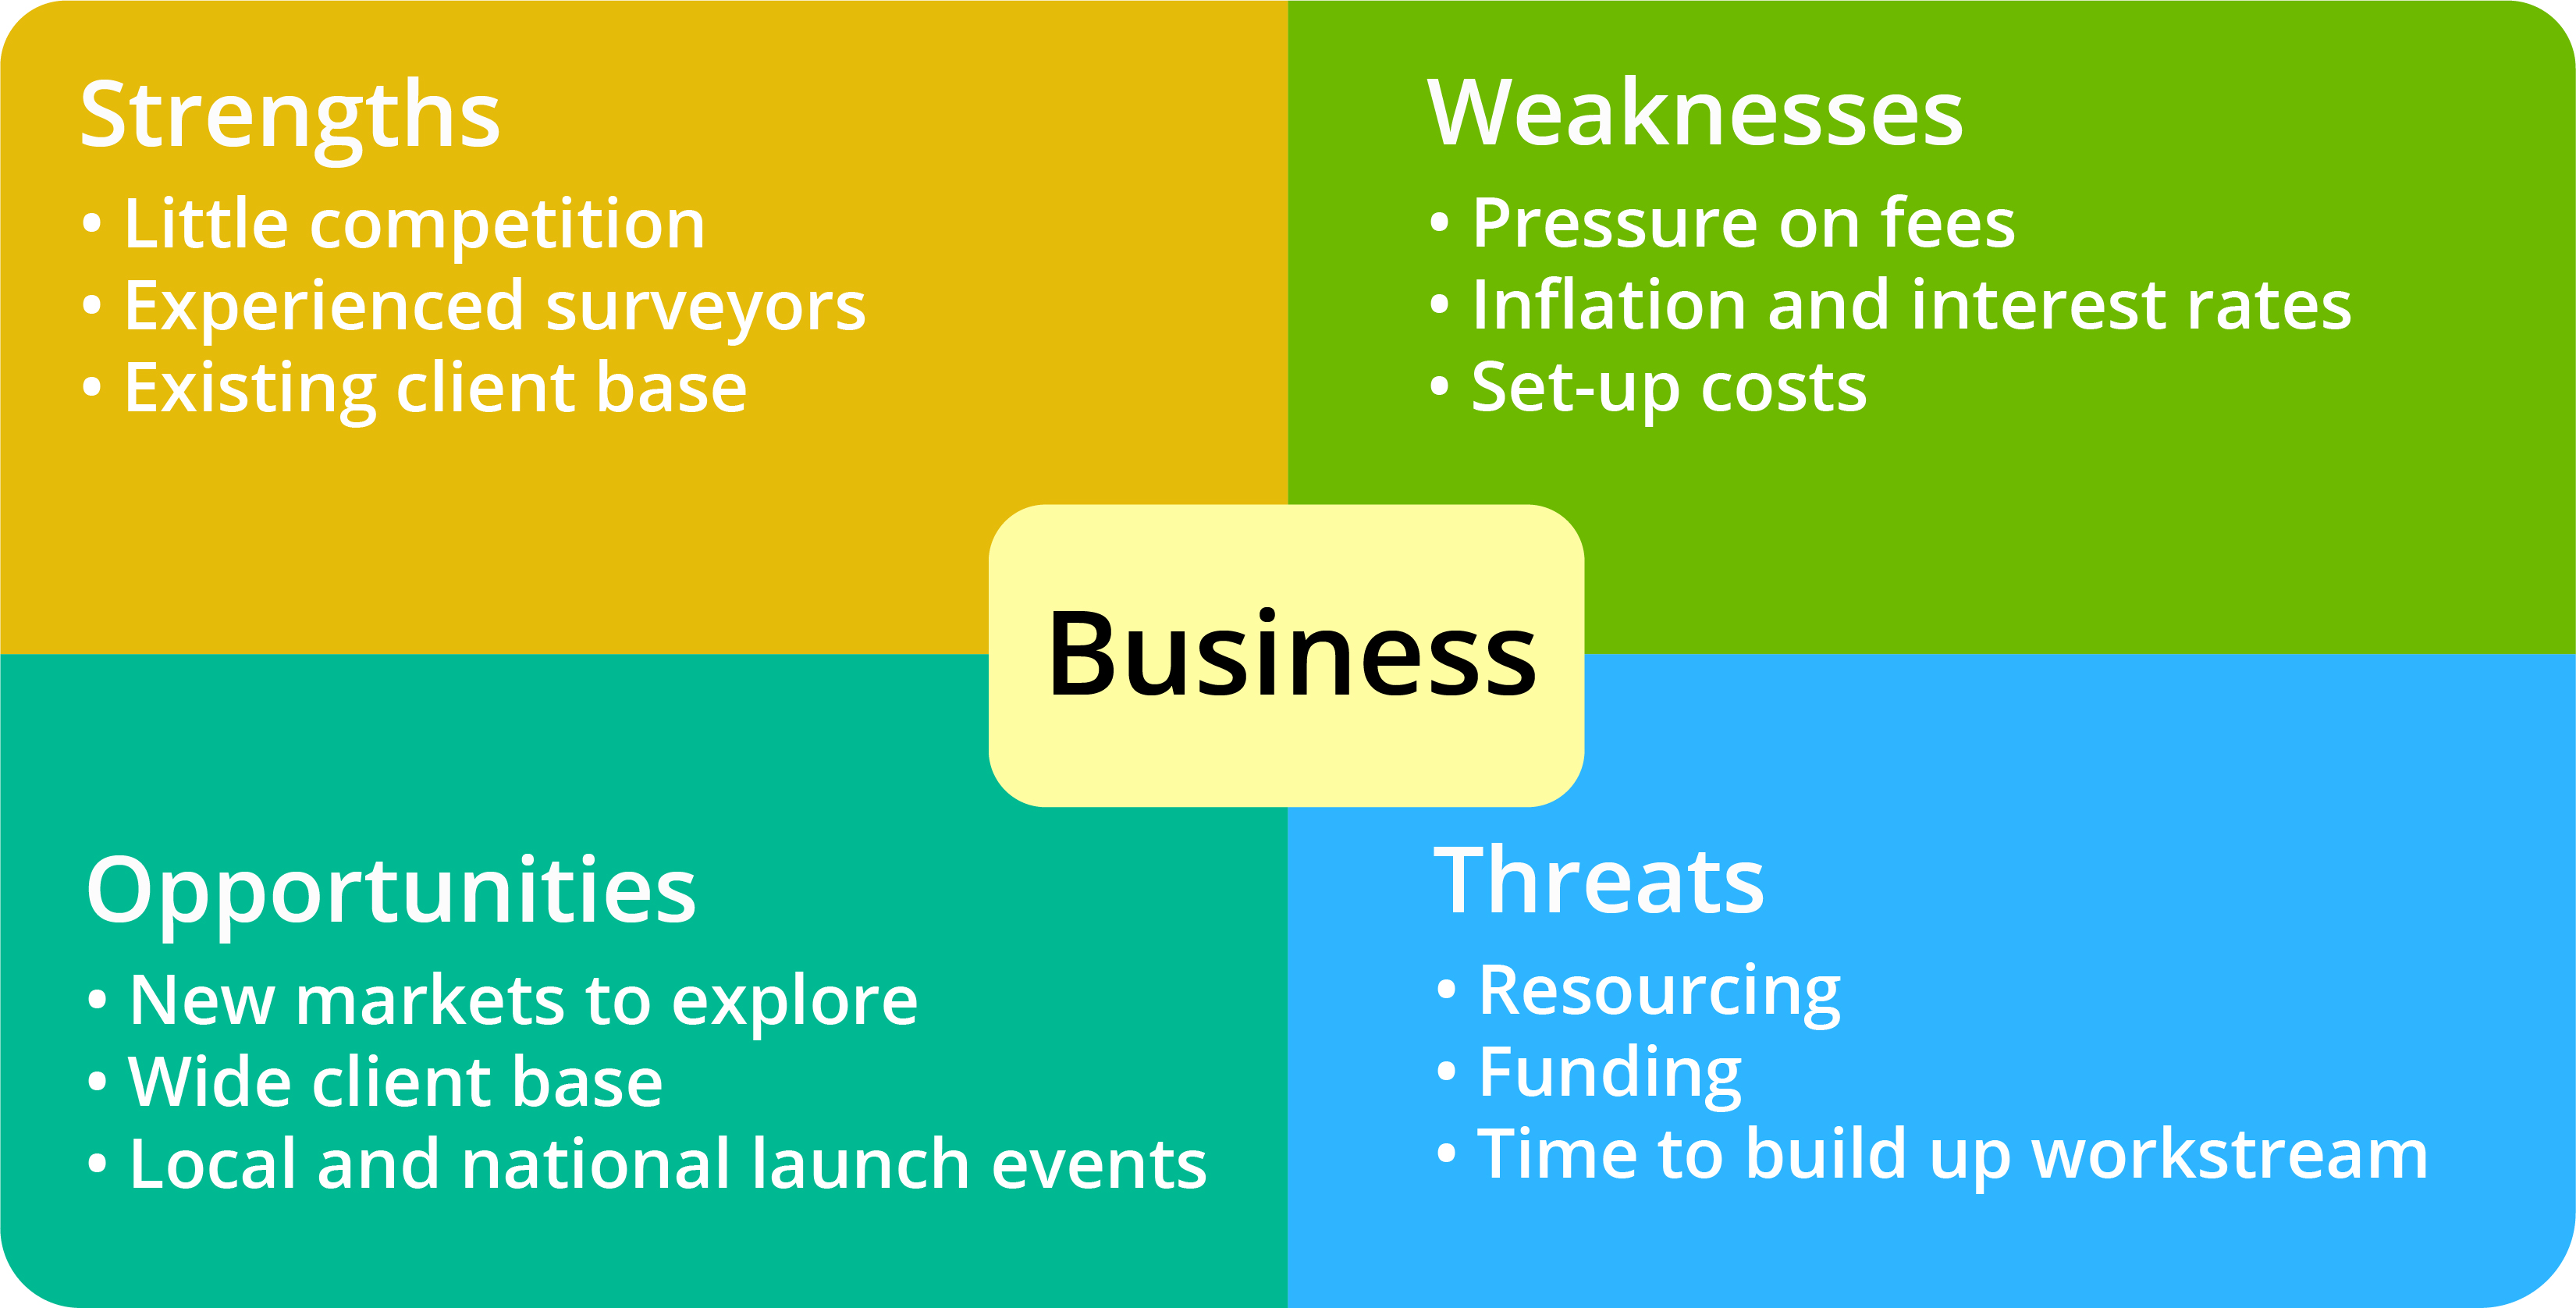 Analysis of sample business strengths, weaknesses, opportunities and threats